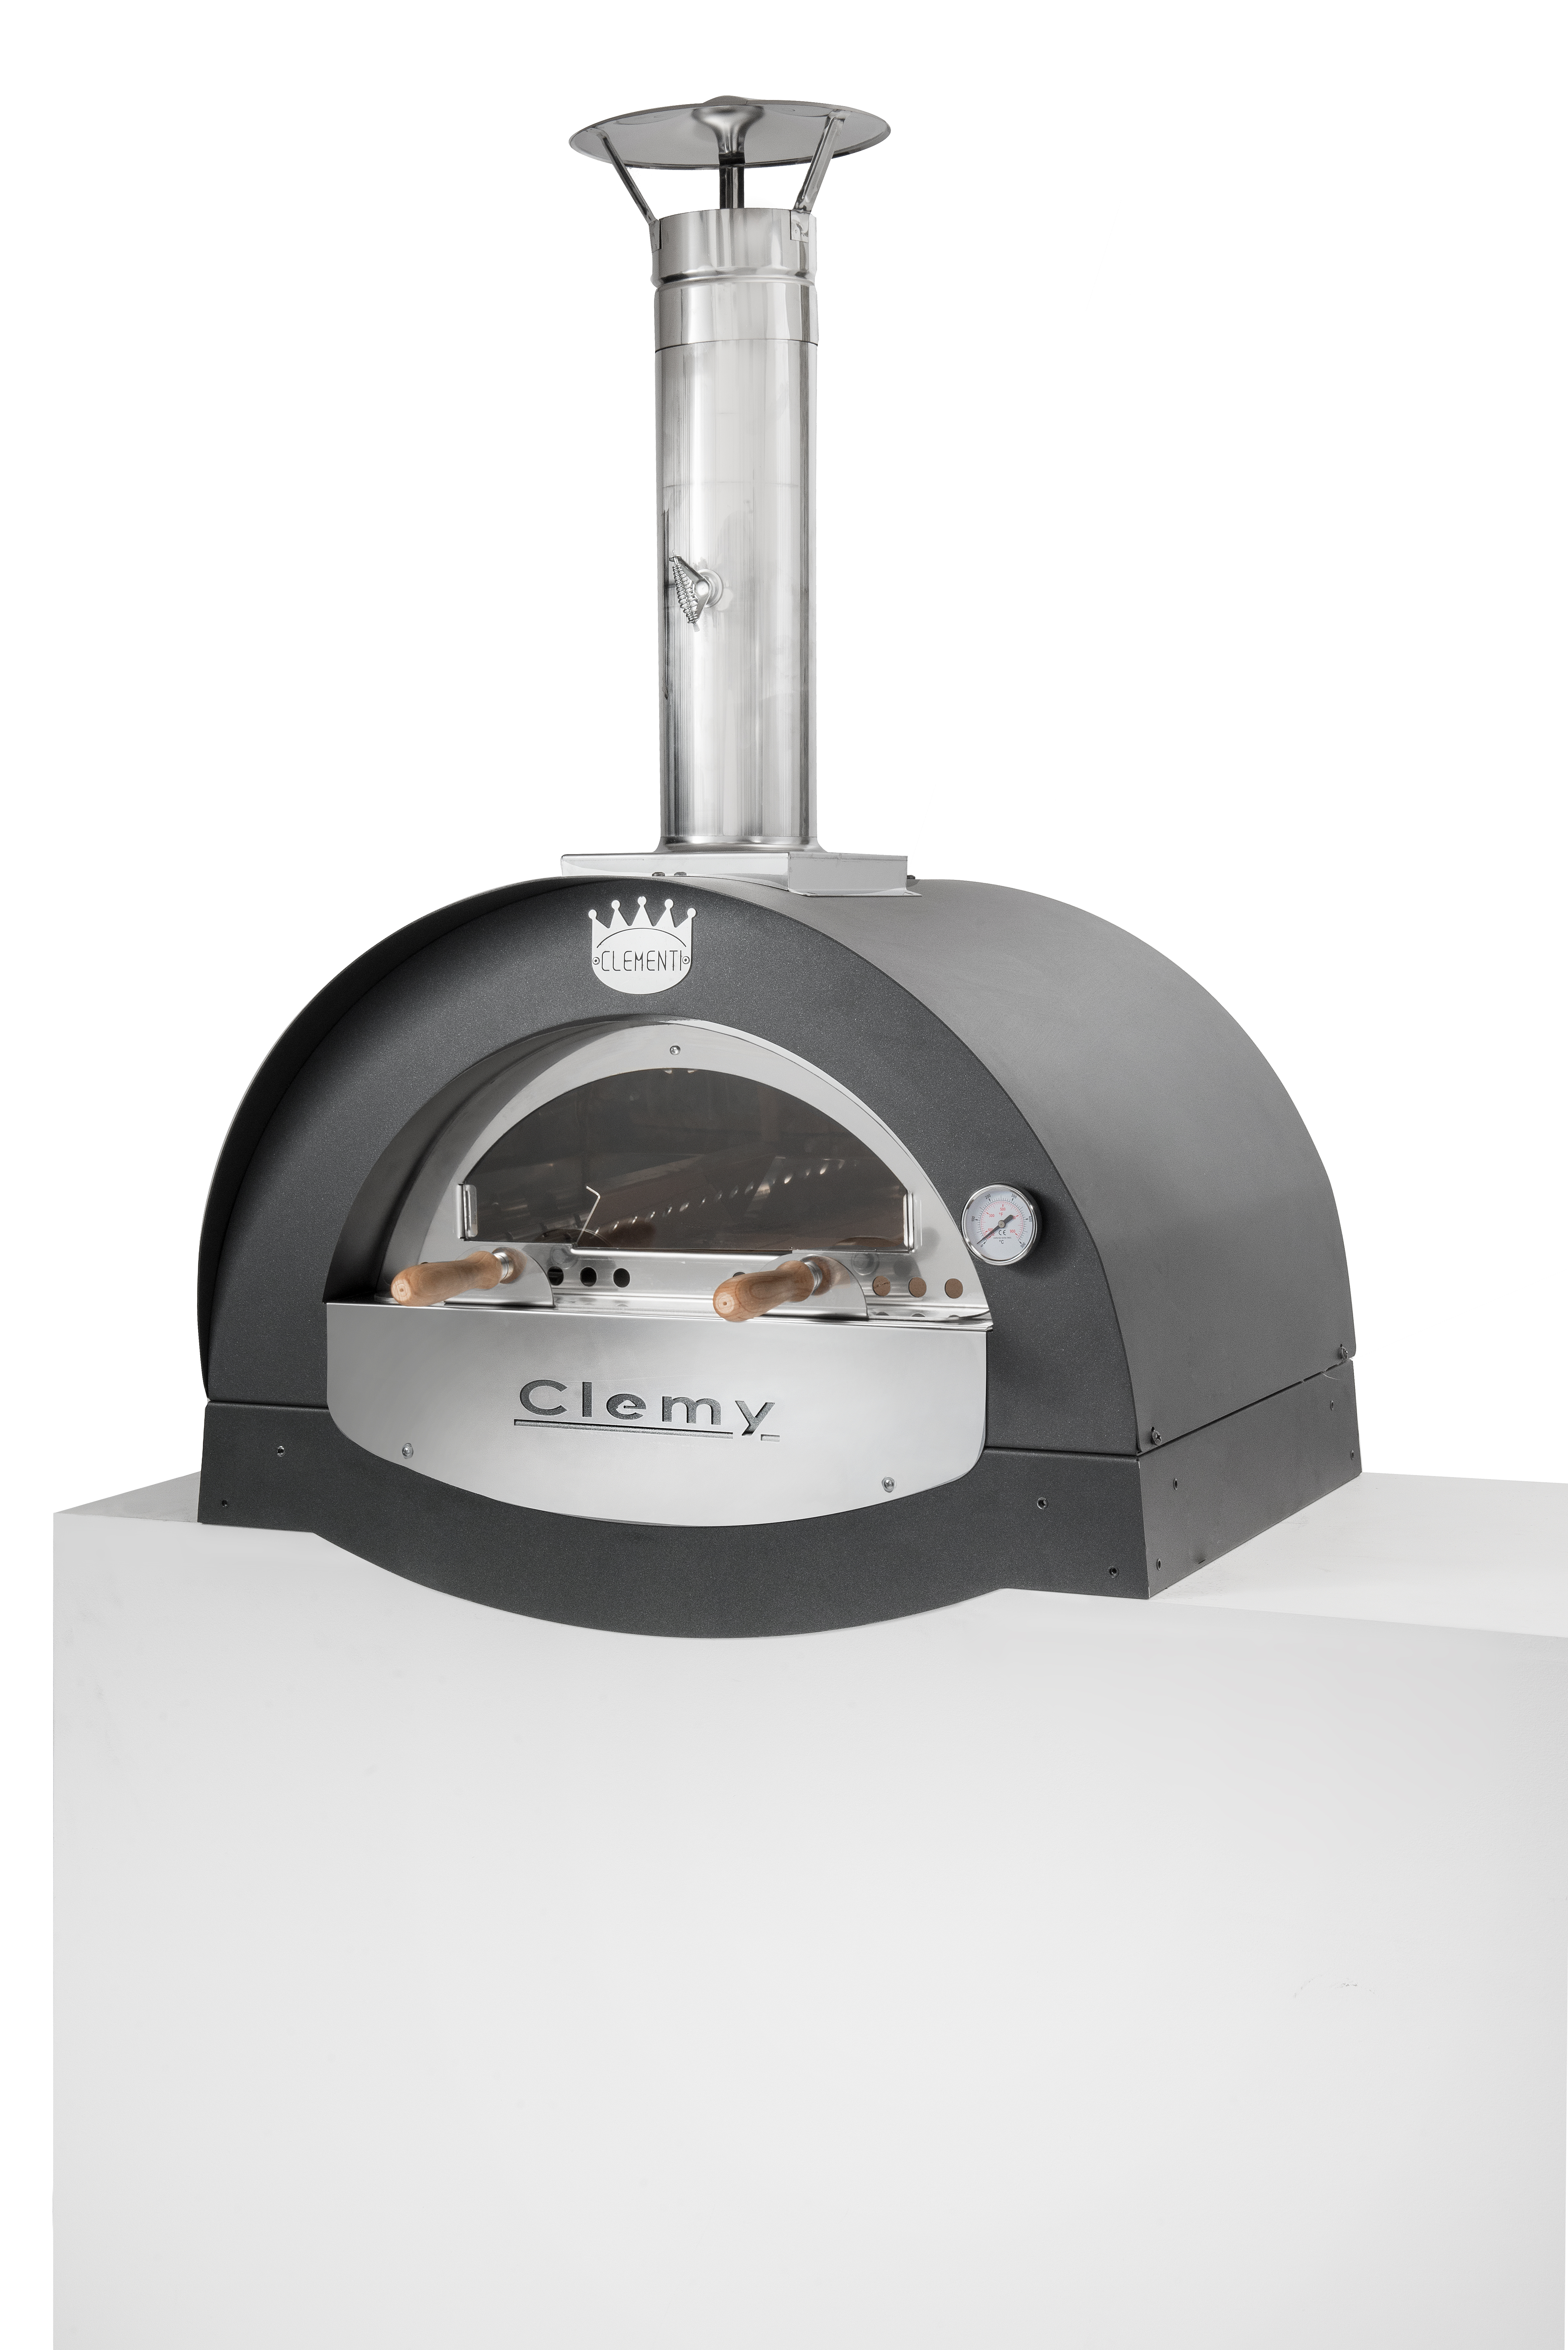 Pizzaovens Clementi Clemy